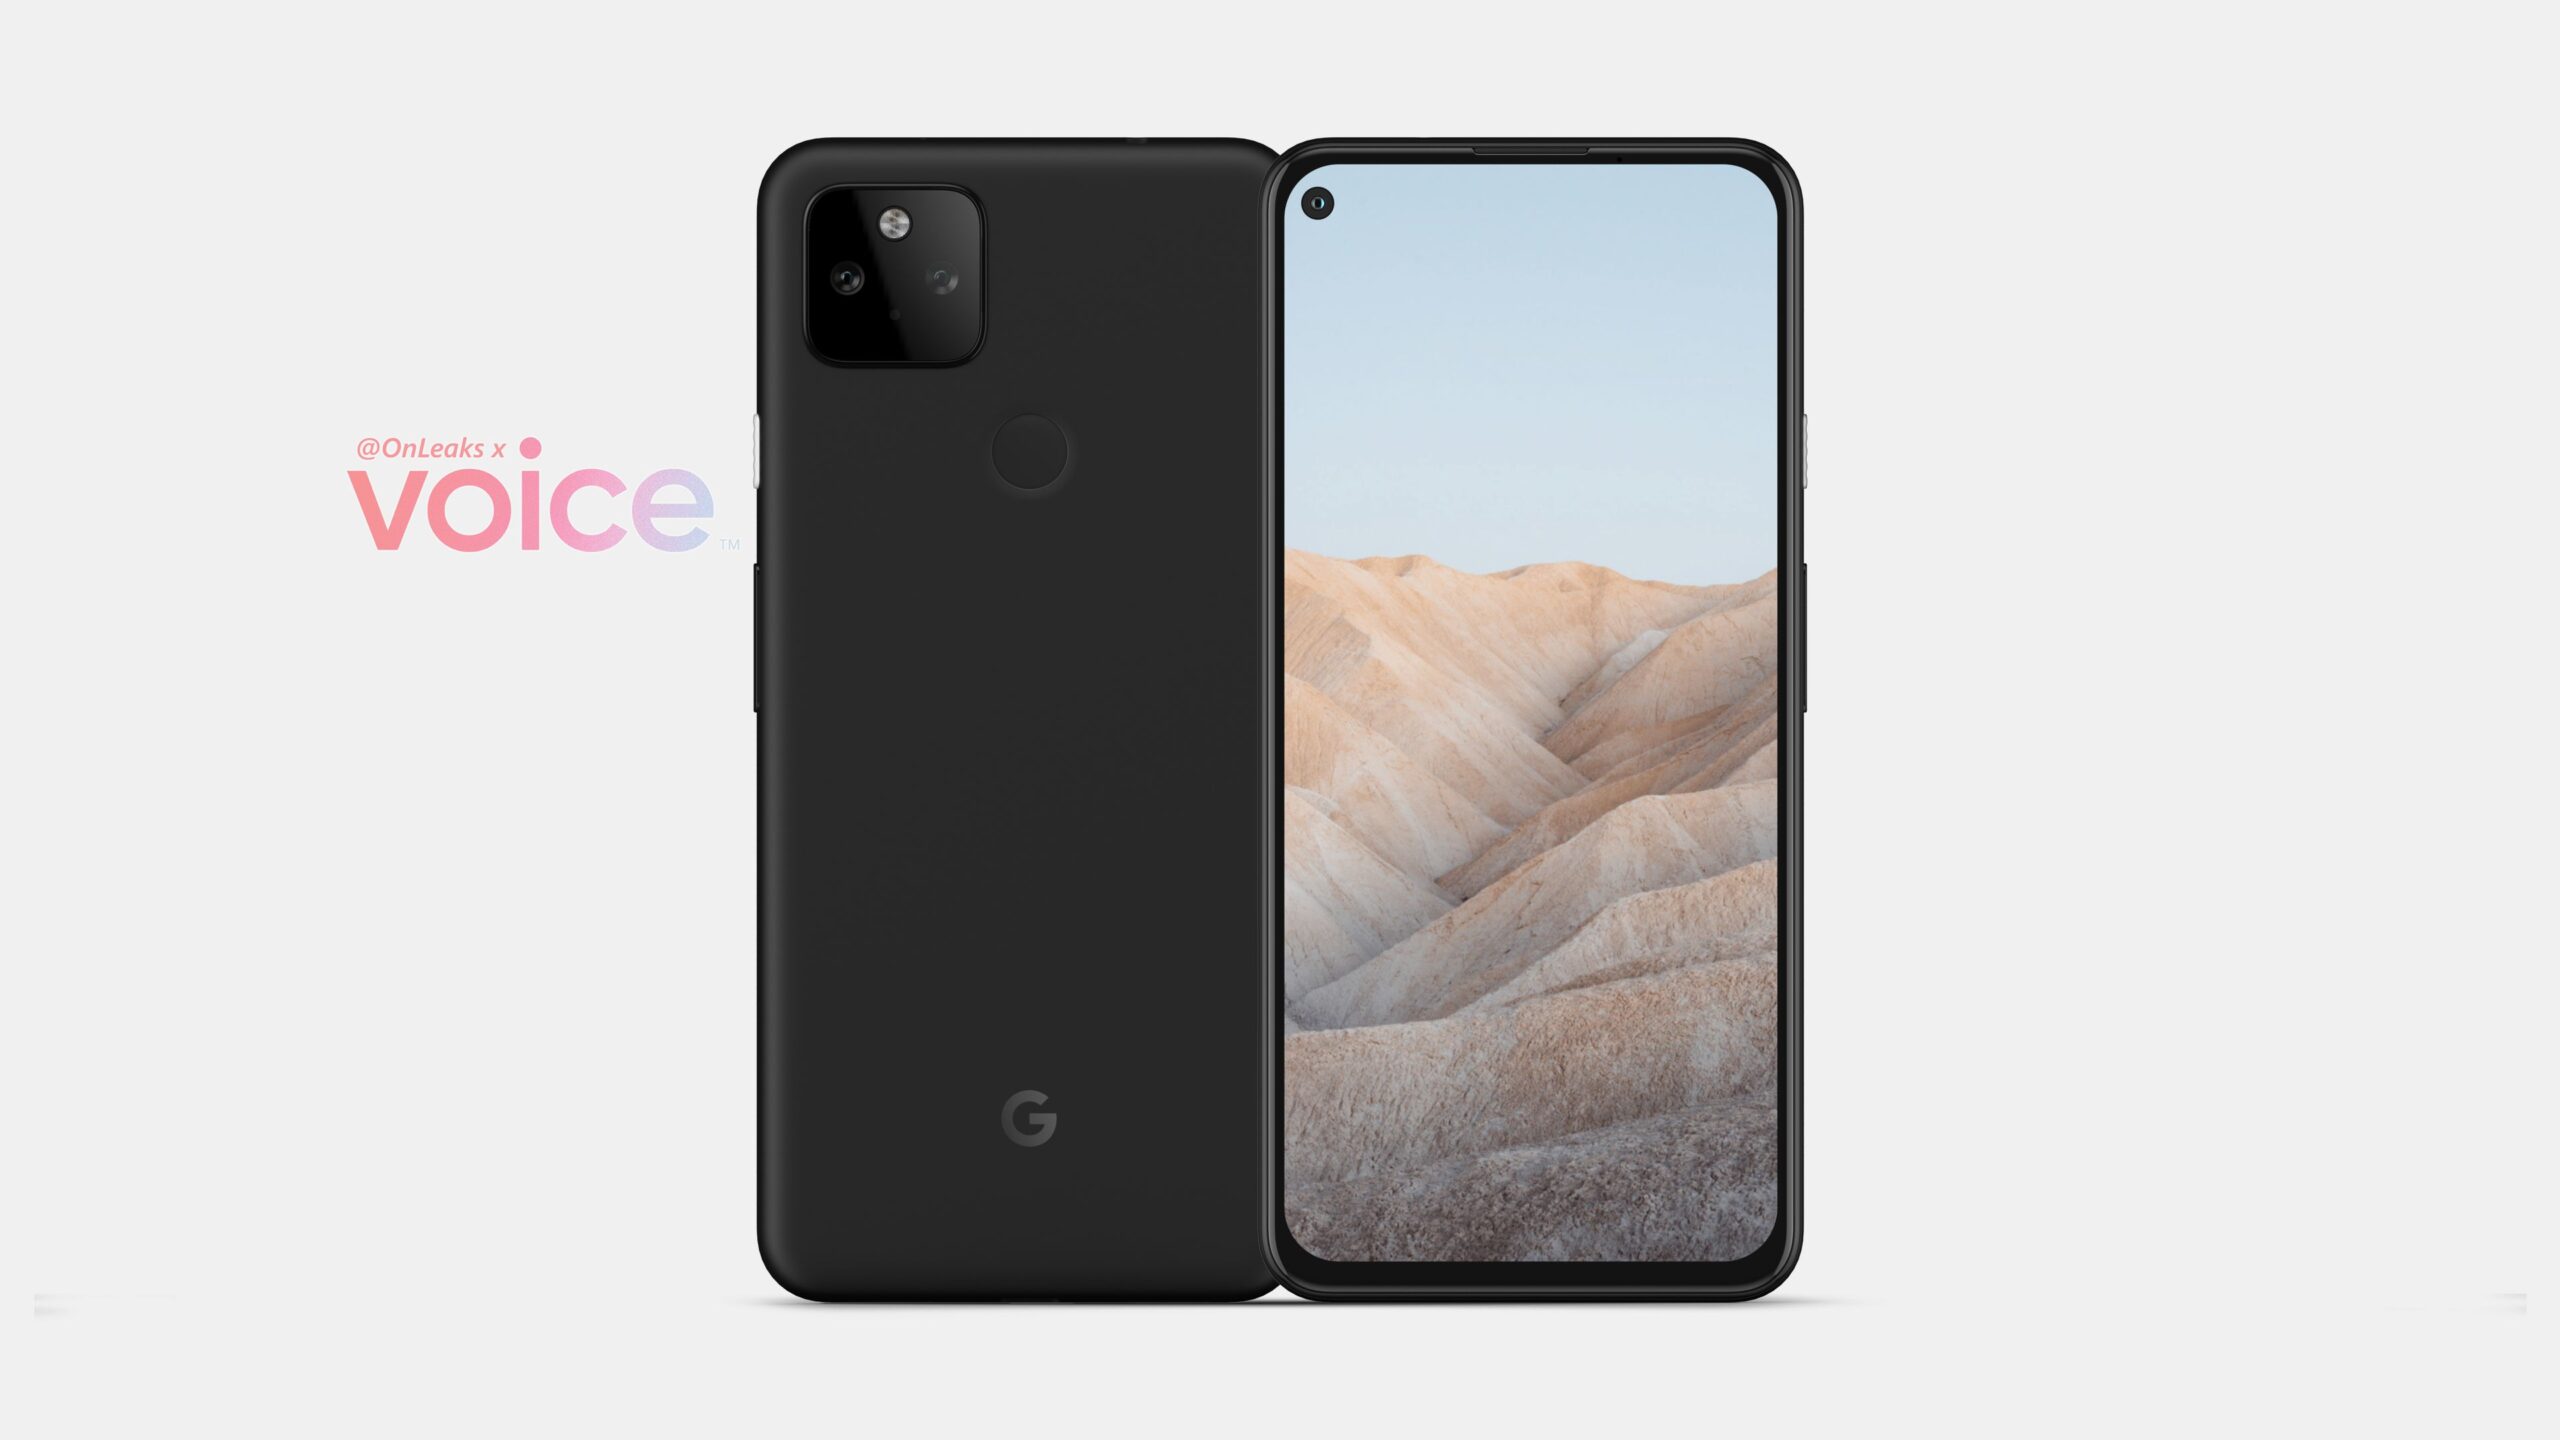 Renders provide a first look at the Pixel 5a and it looks a lot like the Pixel 4a 5G